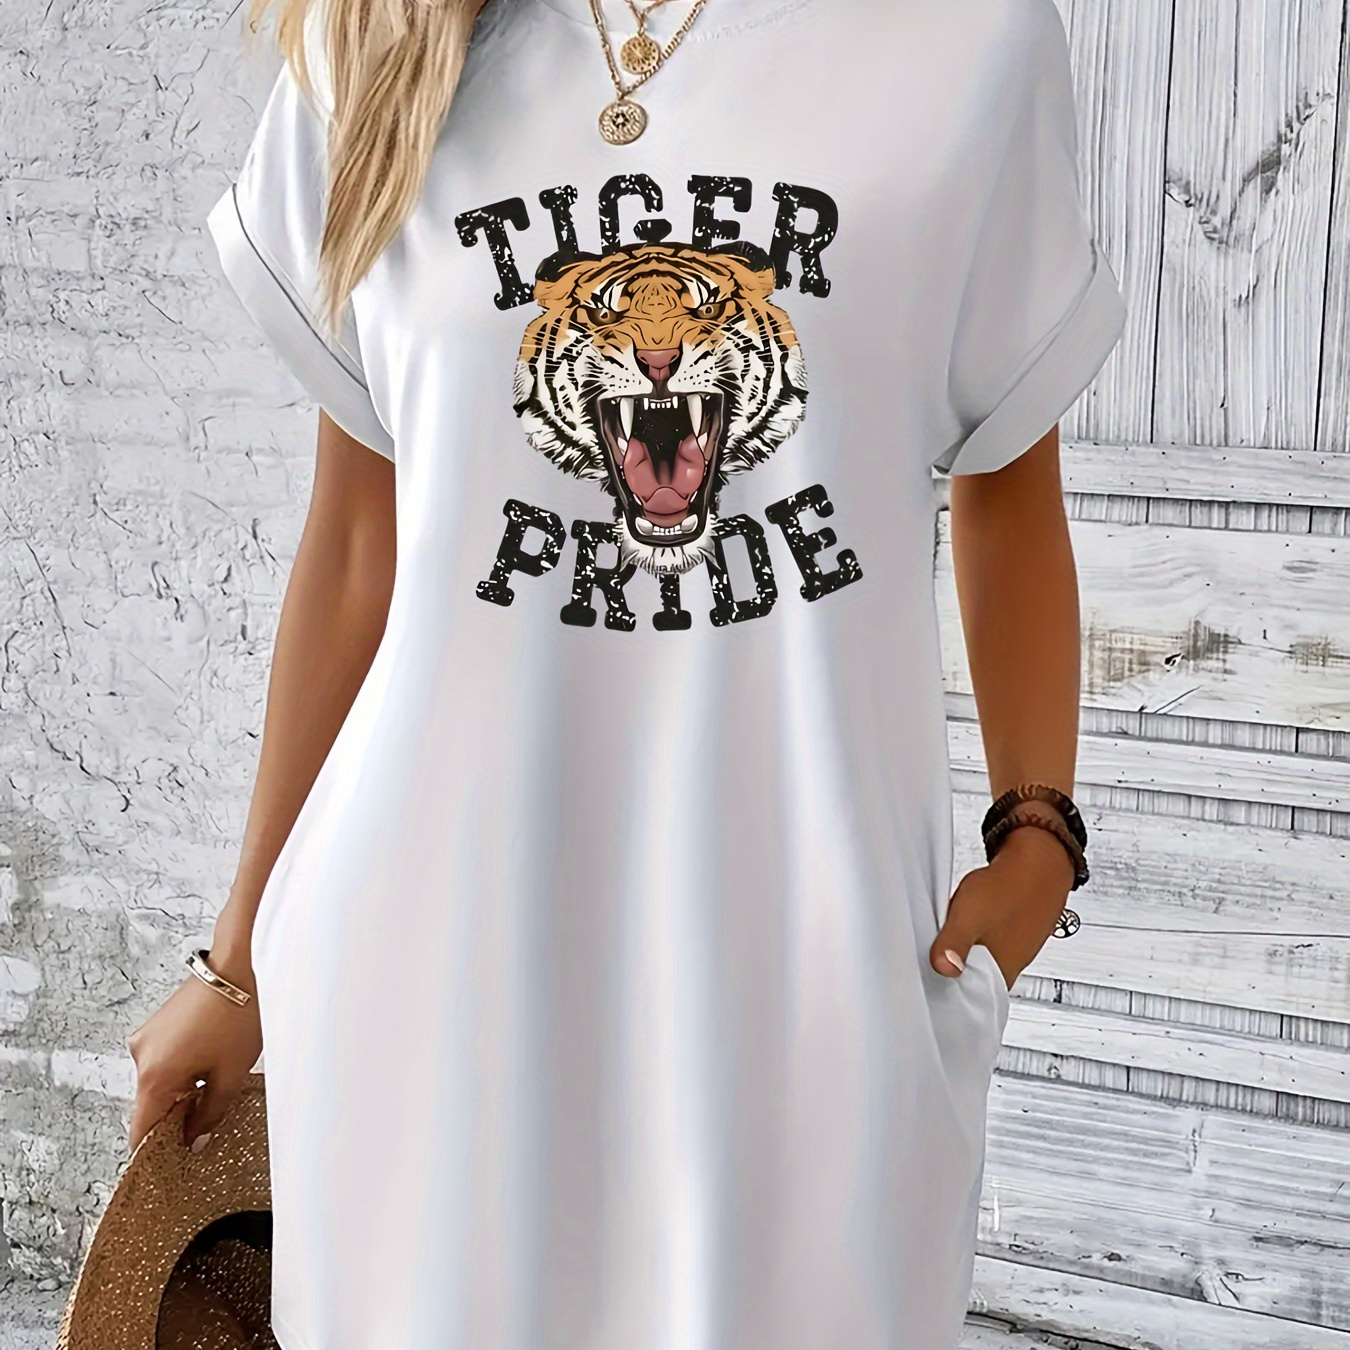 

Tiger Print Pockets Tee Dress, Casual Short Sleeve Crew Neck Dress For Summer & Spring, Women's Clothing